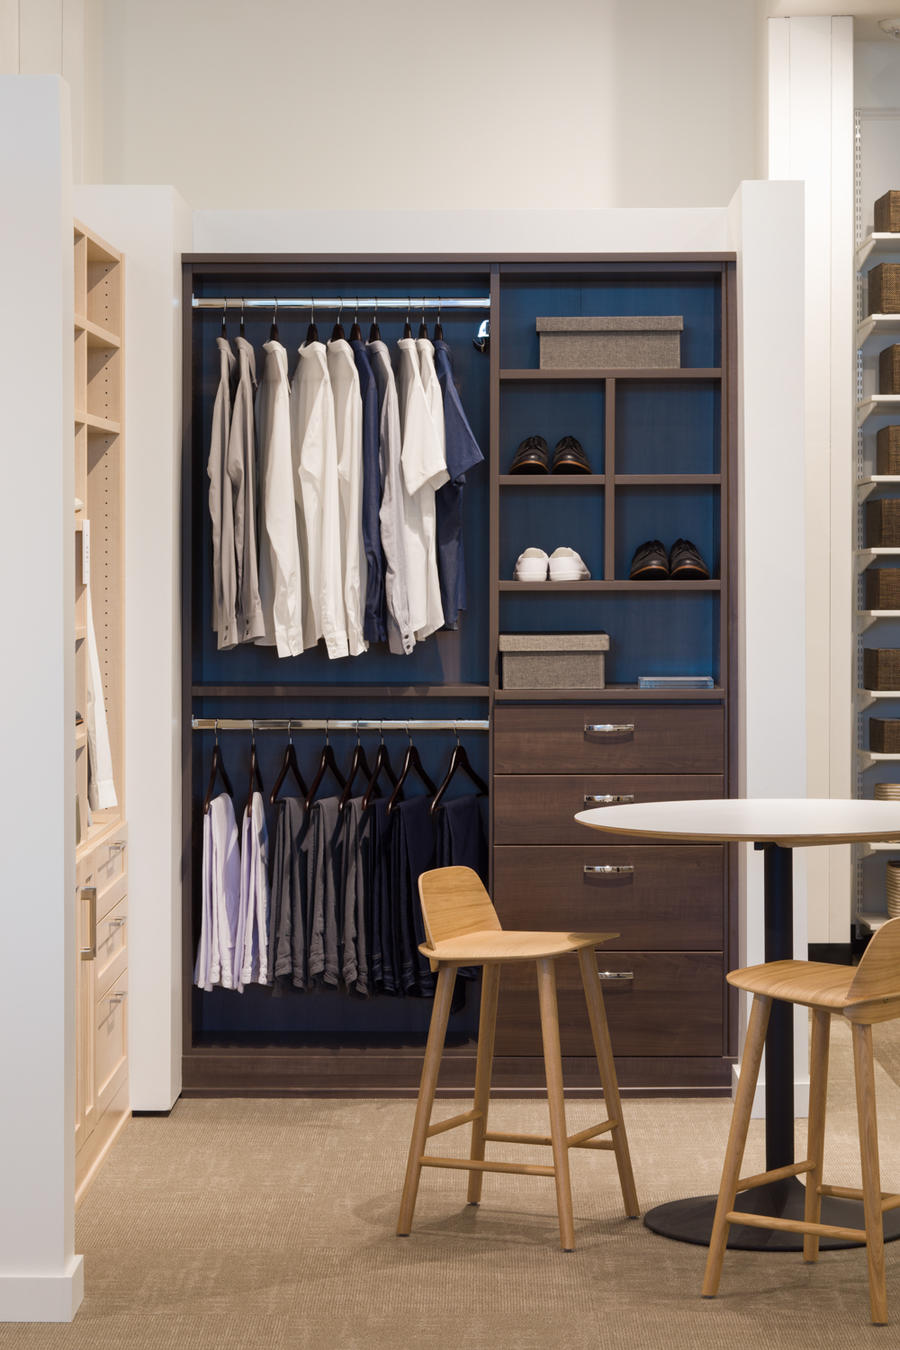 The Container Store is betting on closets